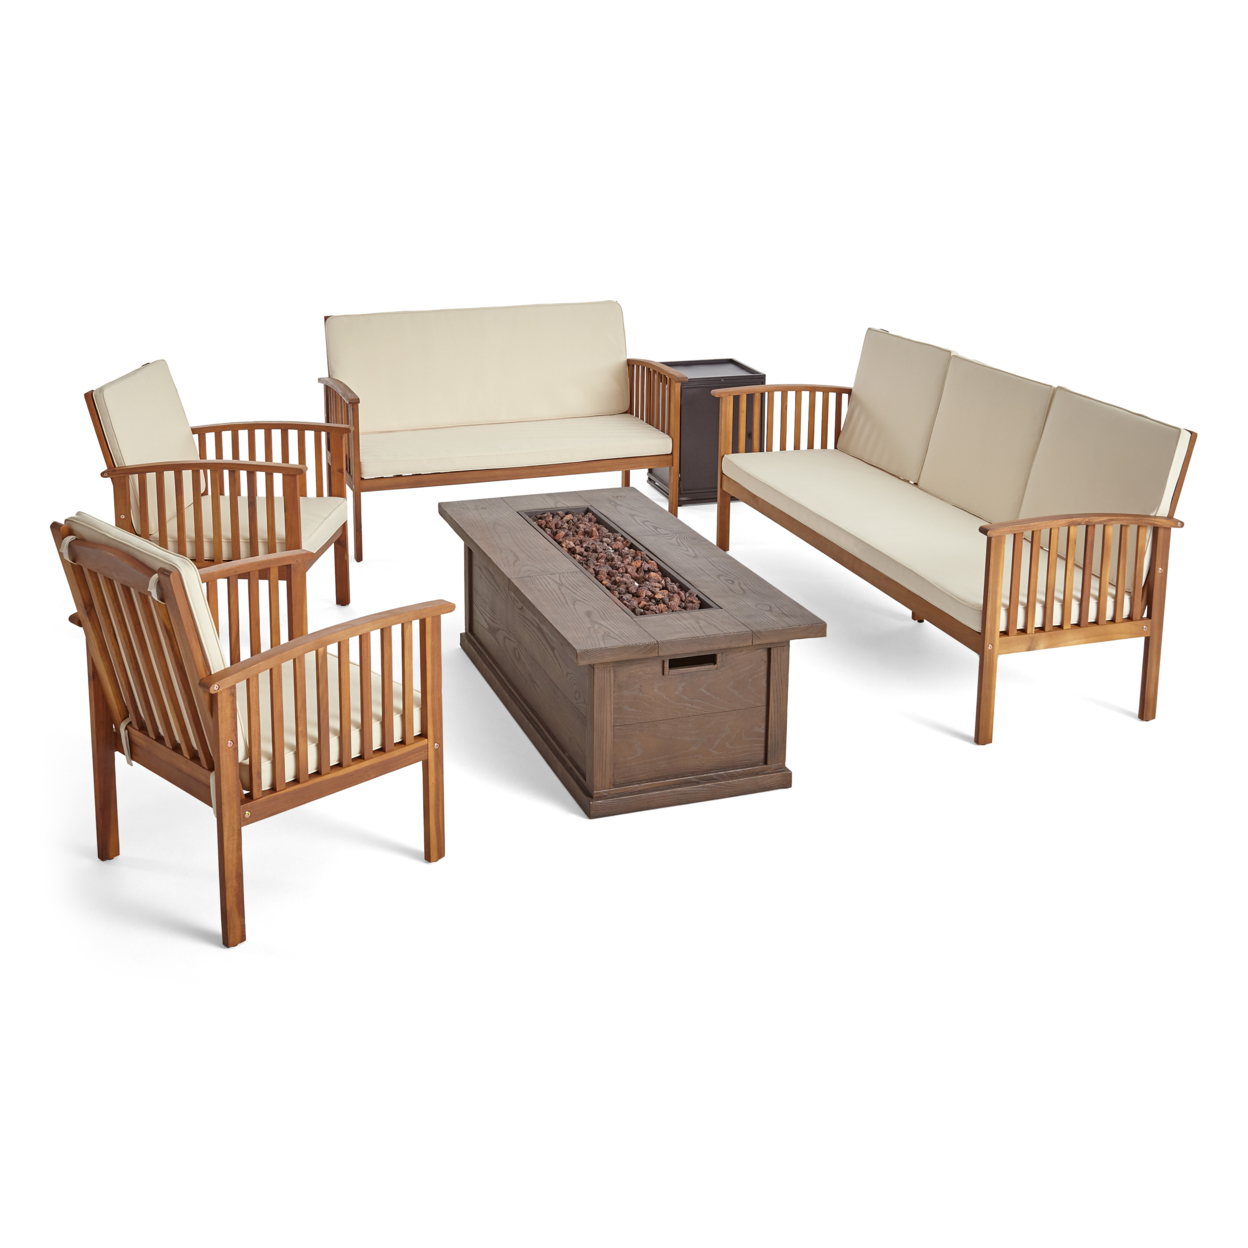 Jean Outdoor 6 Piece Acacia Wood Sofa And Loveseat Conversational Set With Fire Pit - Teak Finish + Cream + Brown